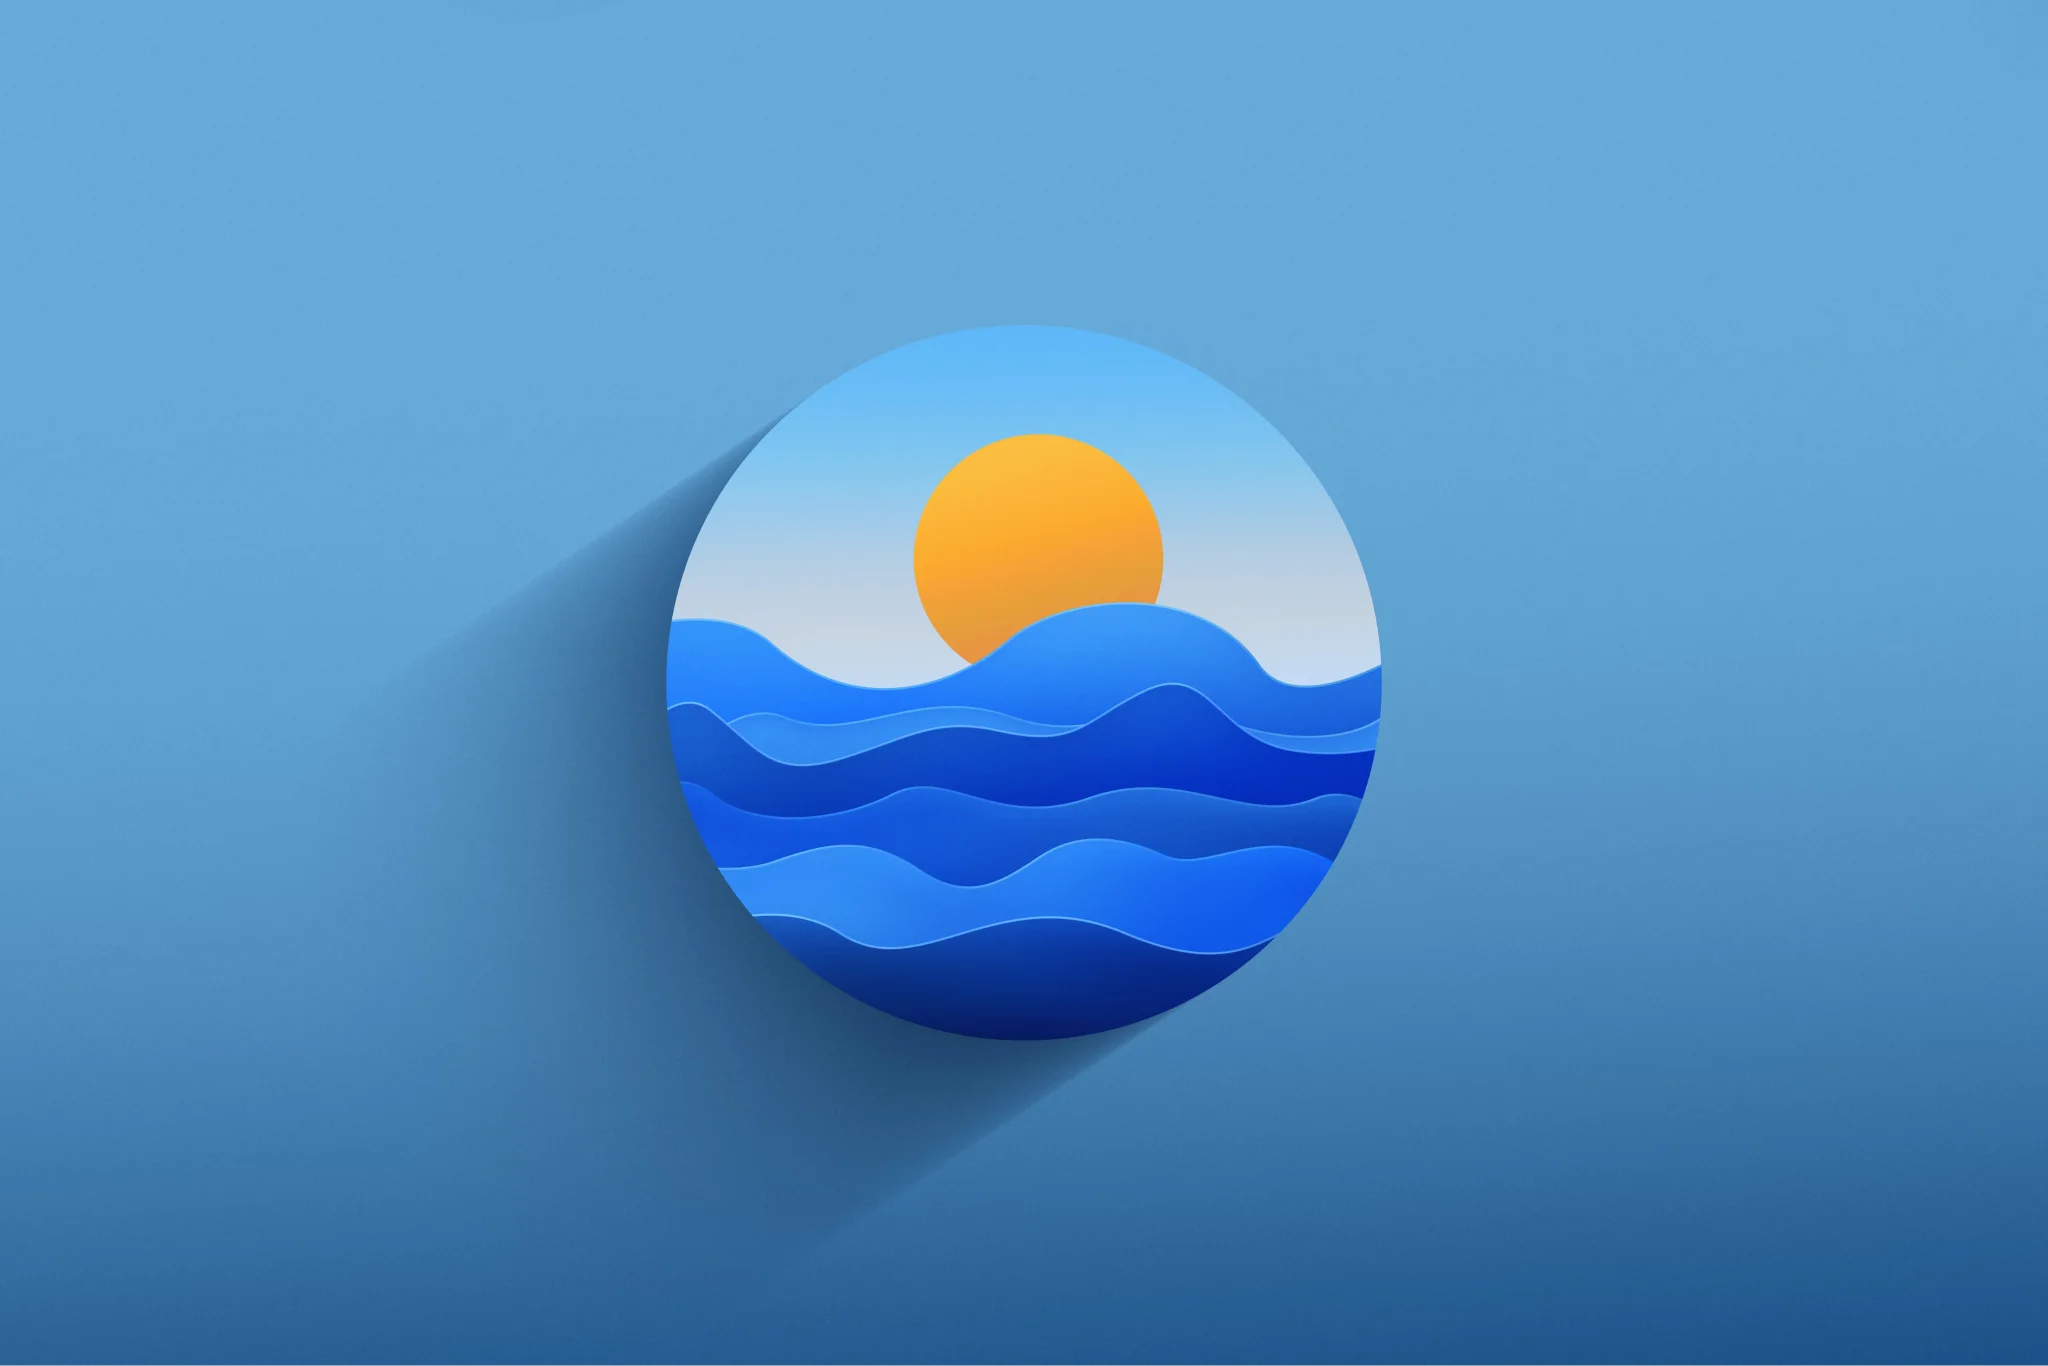 A sunset logo with a background